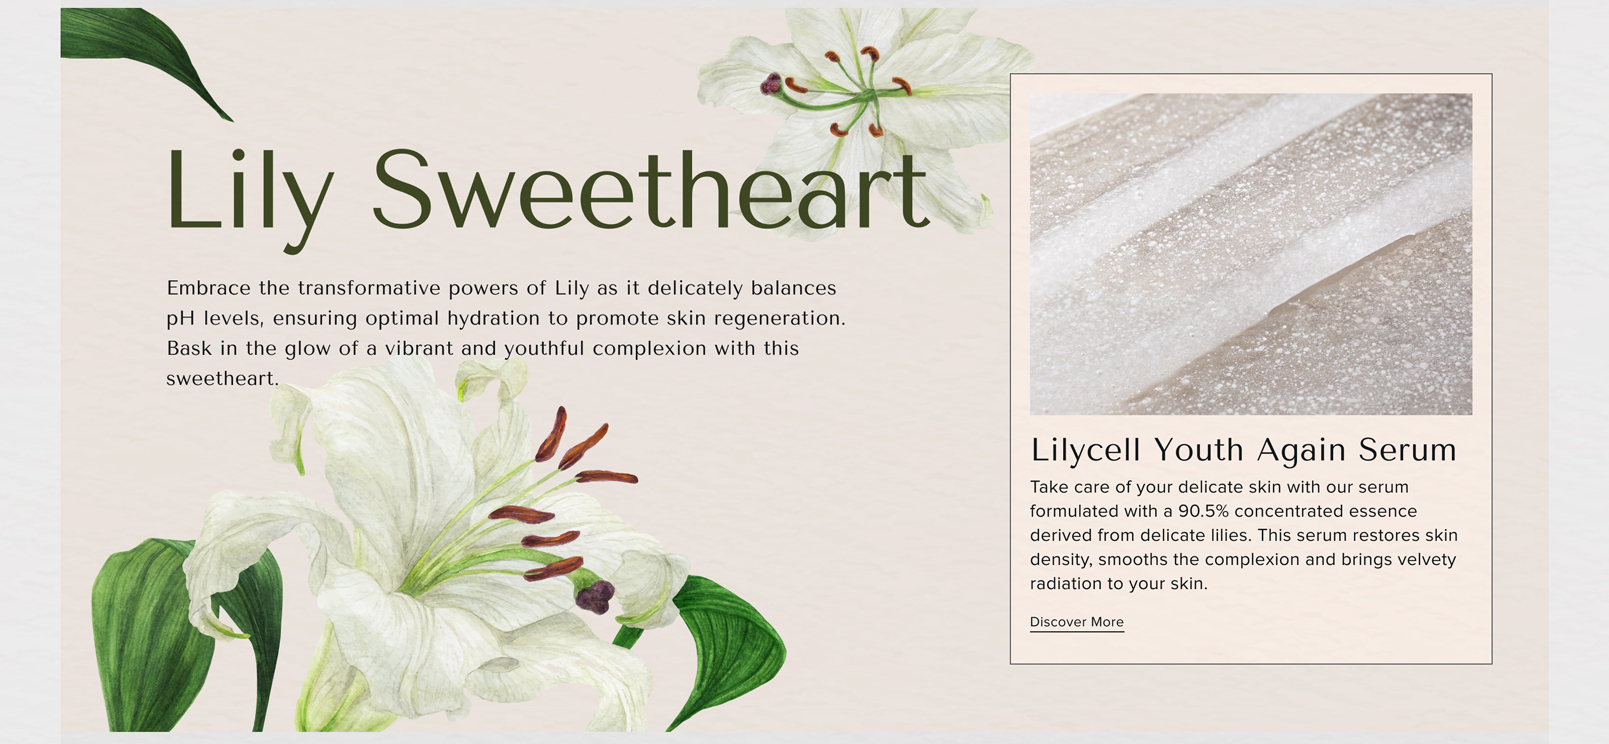 Lily Sweetheart Embrace the transformative powers of Lily as it delicately balances pH levels, ensuring optimal hydration to promote skin regeneration. Bask in the glow of a vibrant and youthful complexion with this sweetheart. - Lilycell Youth Again Serum